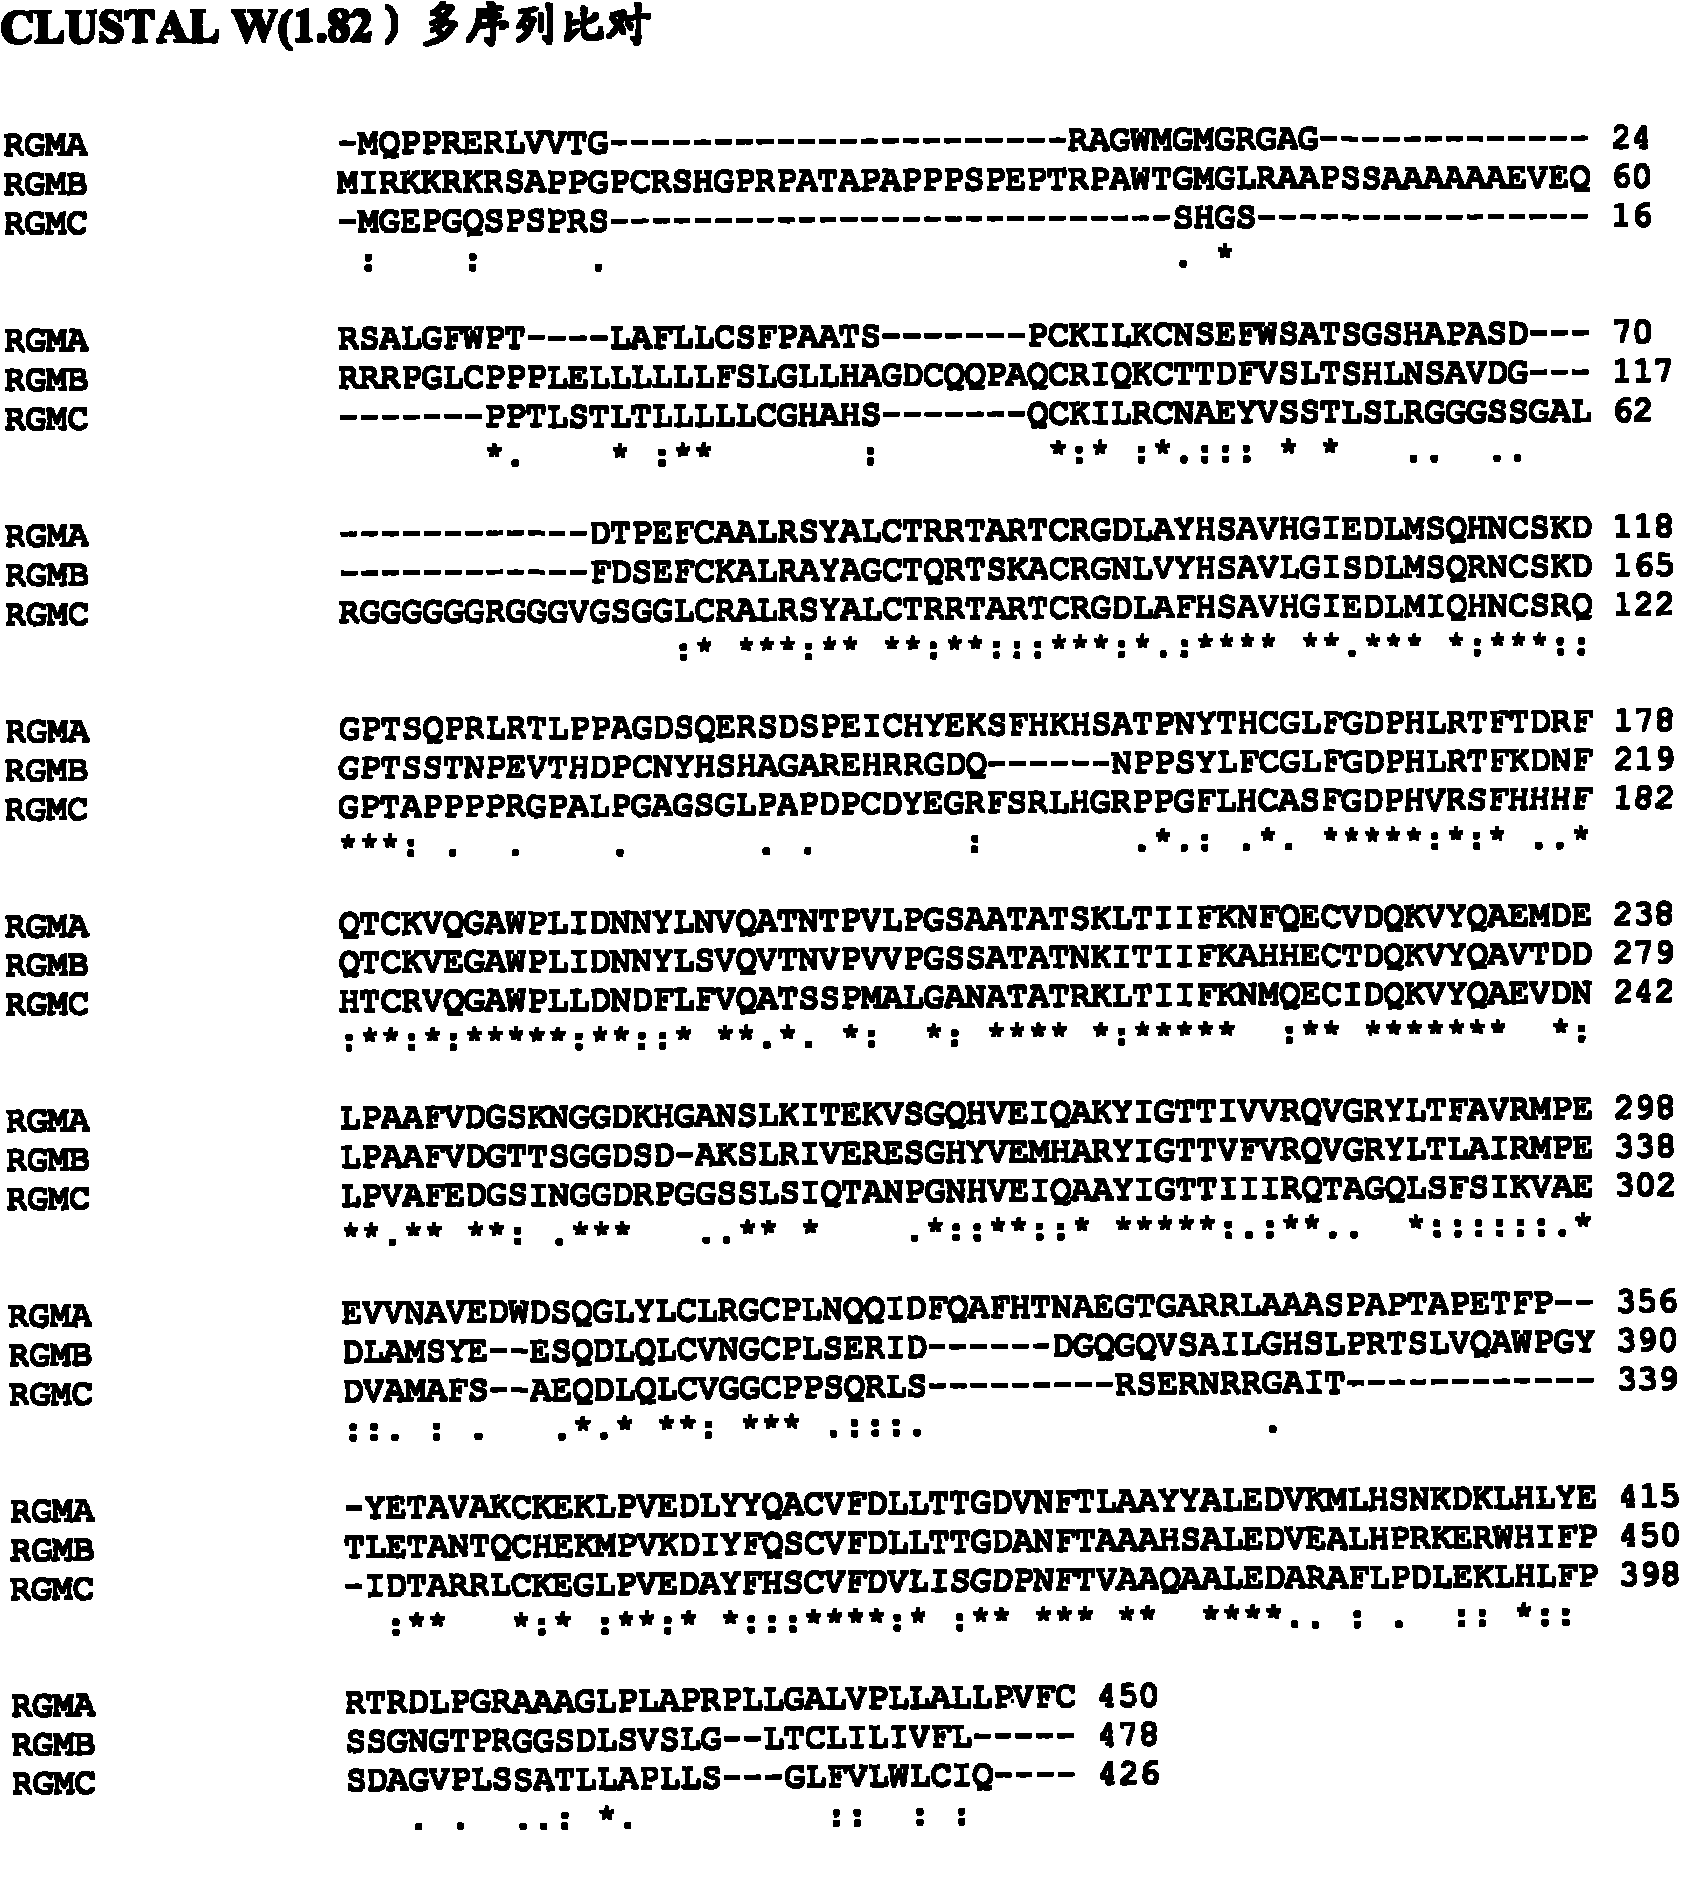 Bone morphogenetic protein (bmp)-binding domains of proteins of the repulsive guidance molecule (rgm) protein family and functional fragments thereof, and use of same